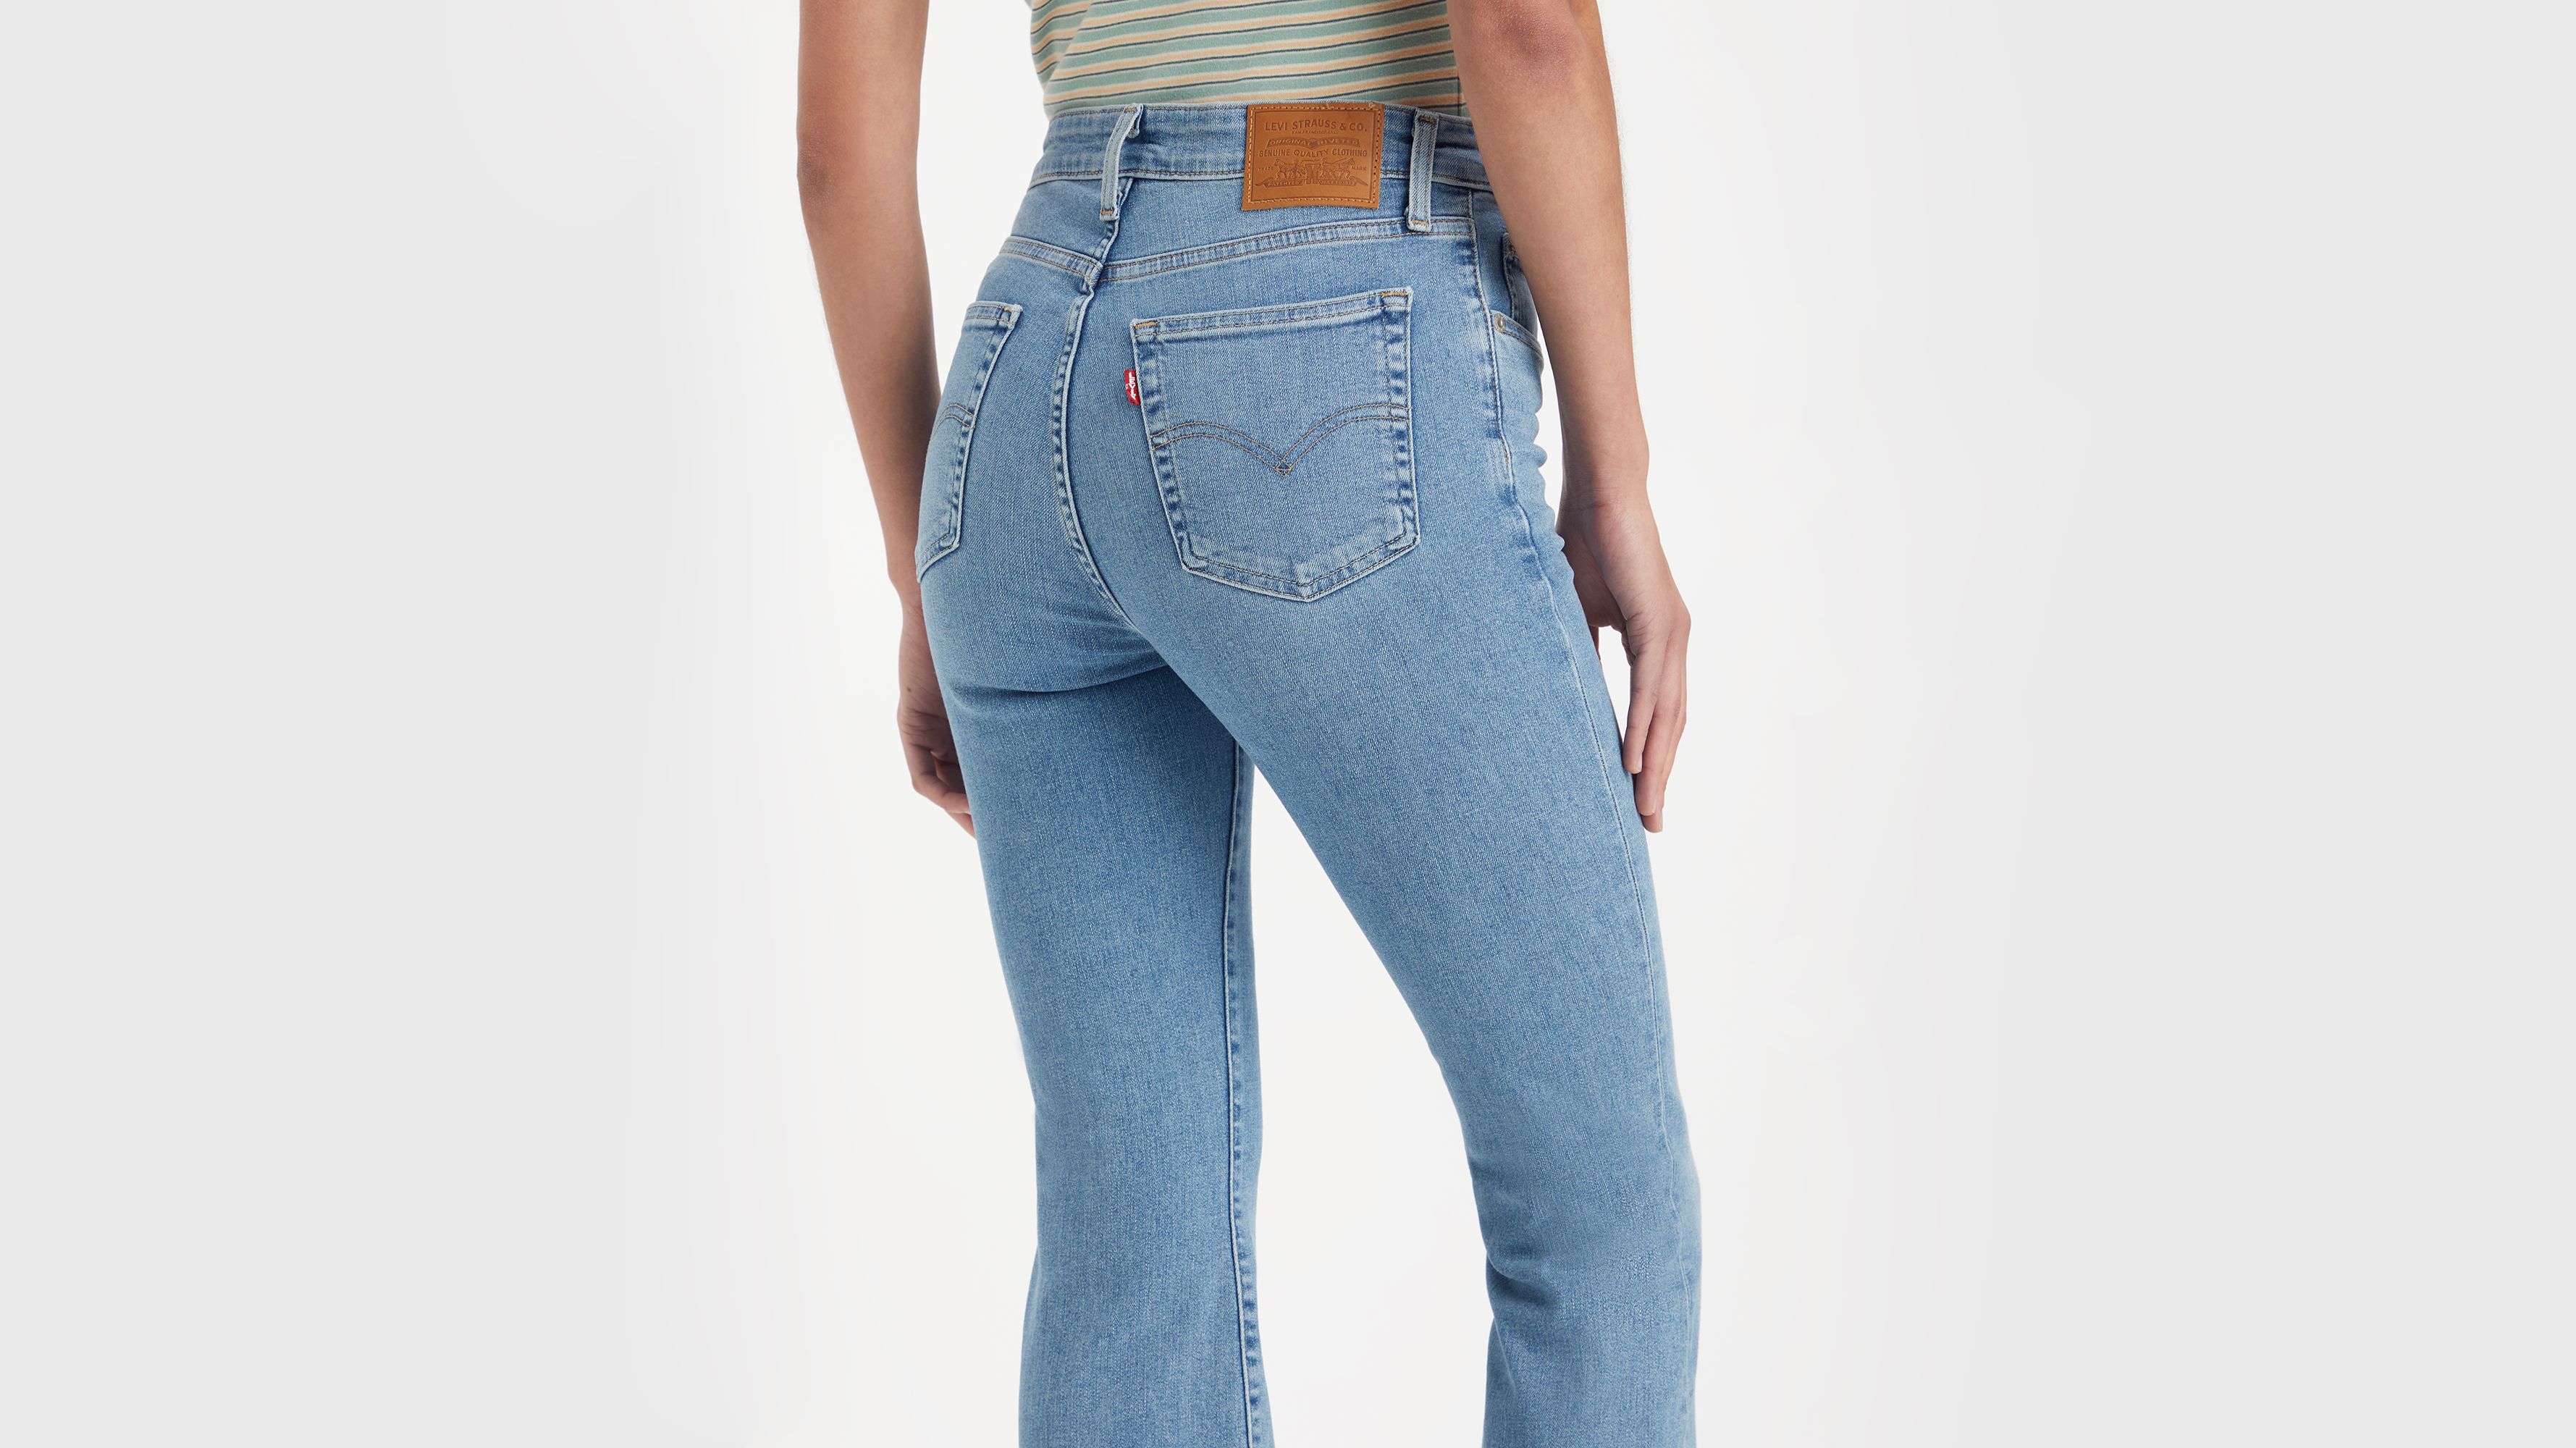 Levis jeans: Are these bum-flashing zip-up hot pants the latest